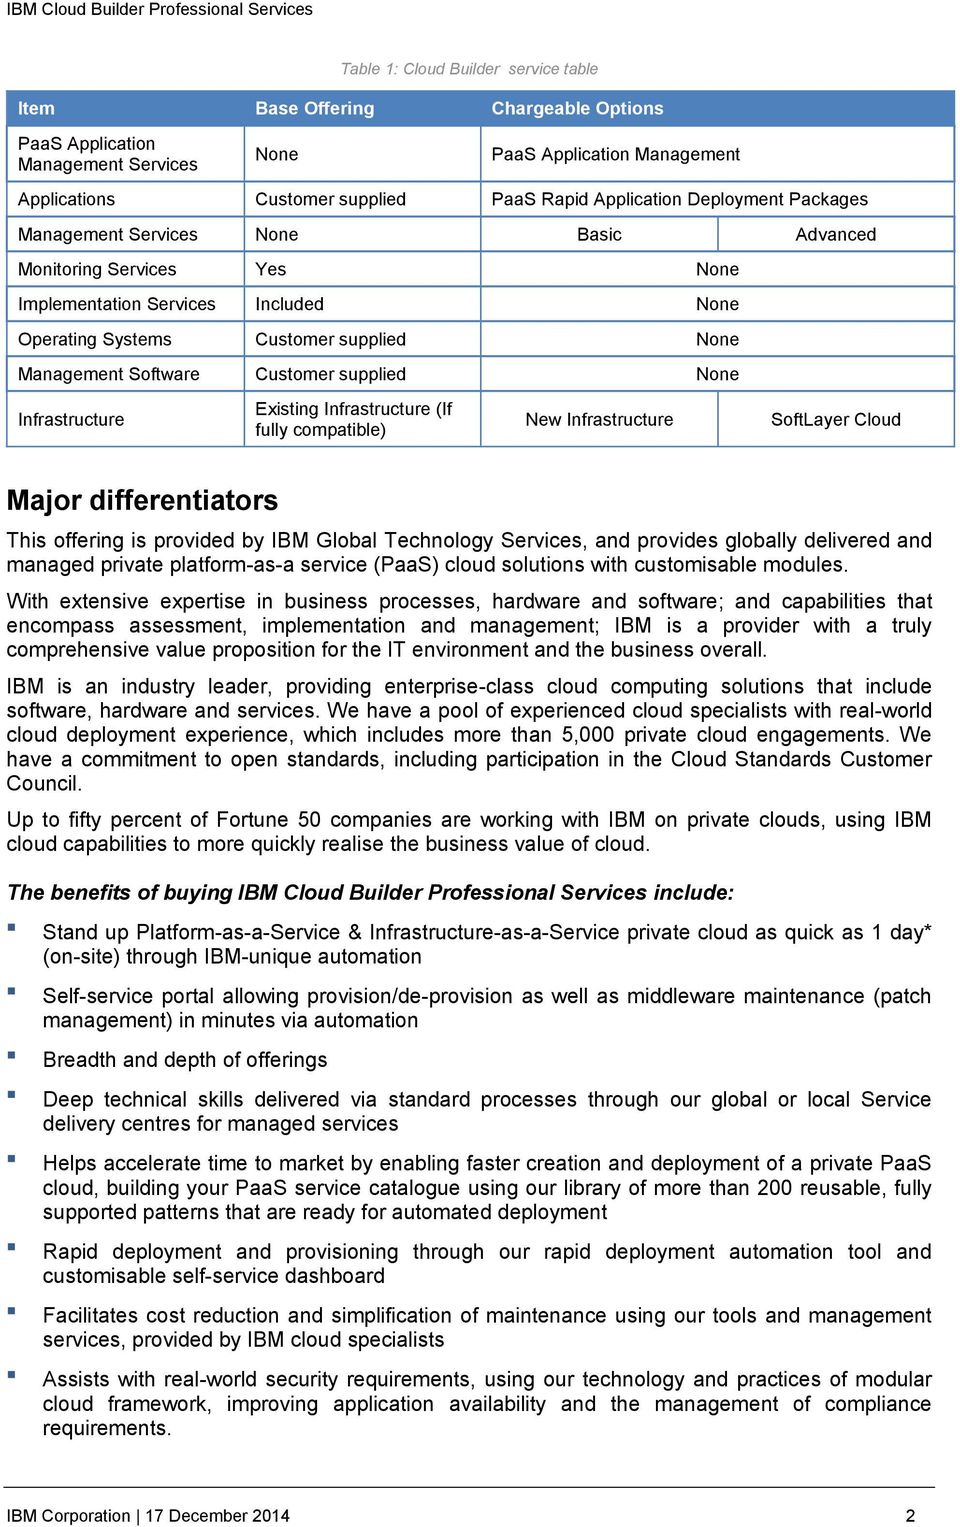 supplied None Infrastructure Existing Infrastructure (If fully compatible) New Infrastructure SoftLayer Cloud Major differentiators This offering is provided by IBM Global Technology Services, and